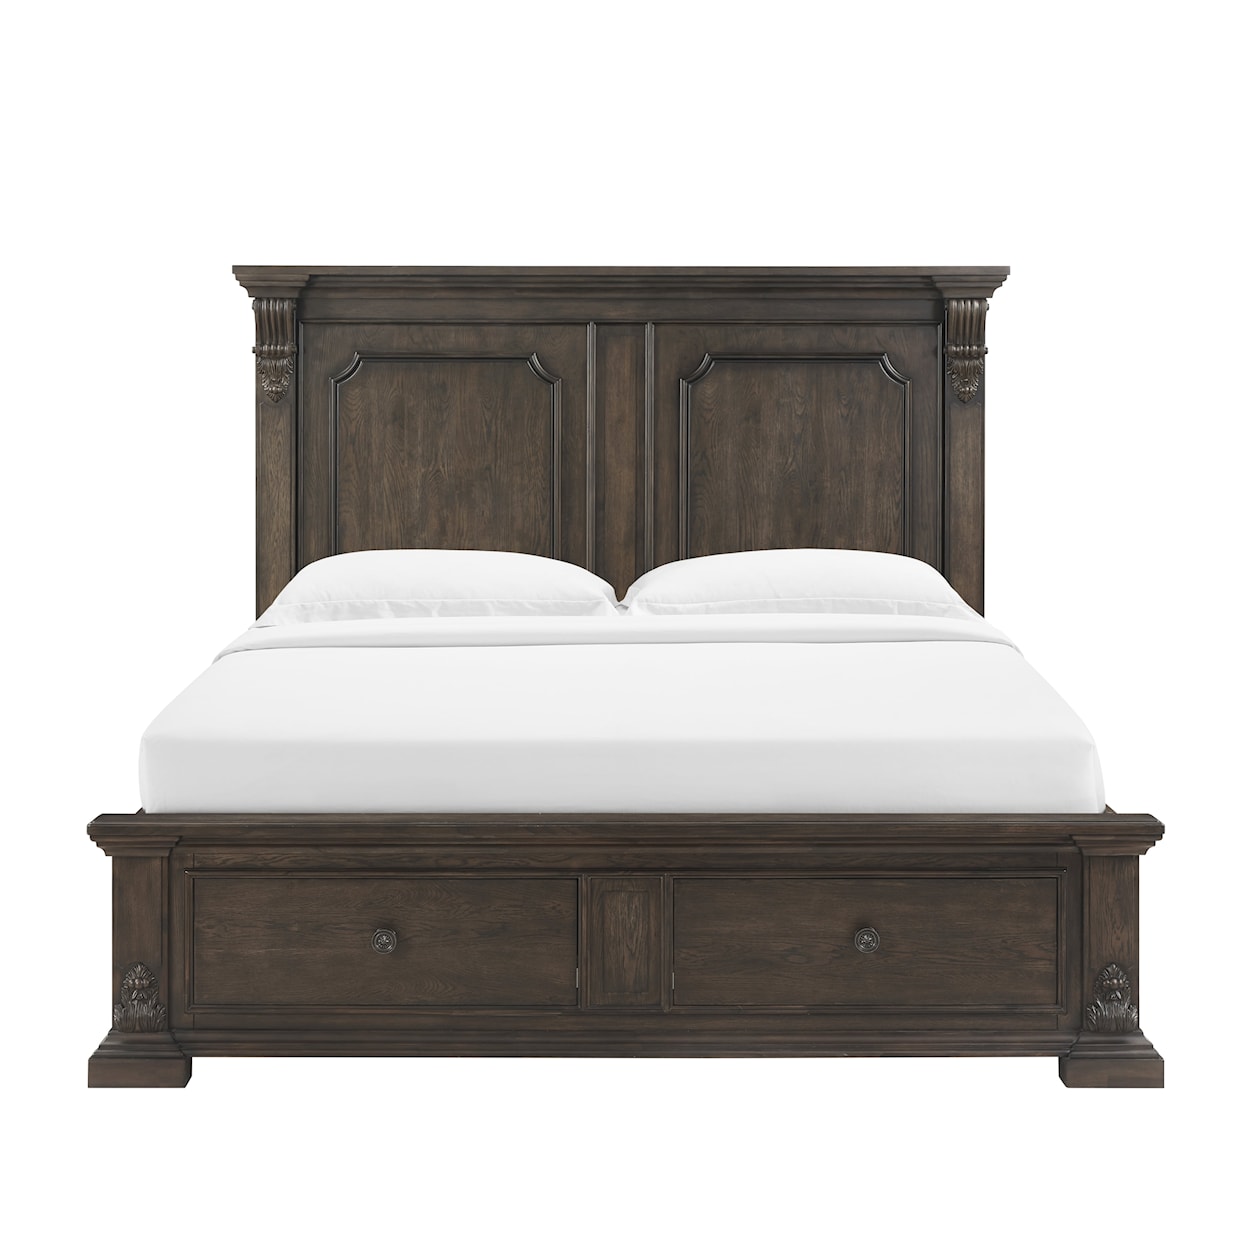 A.R.T. Furniture Inc 341 - Heritage Hill Queen Panel Bed with Footboard Storage